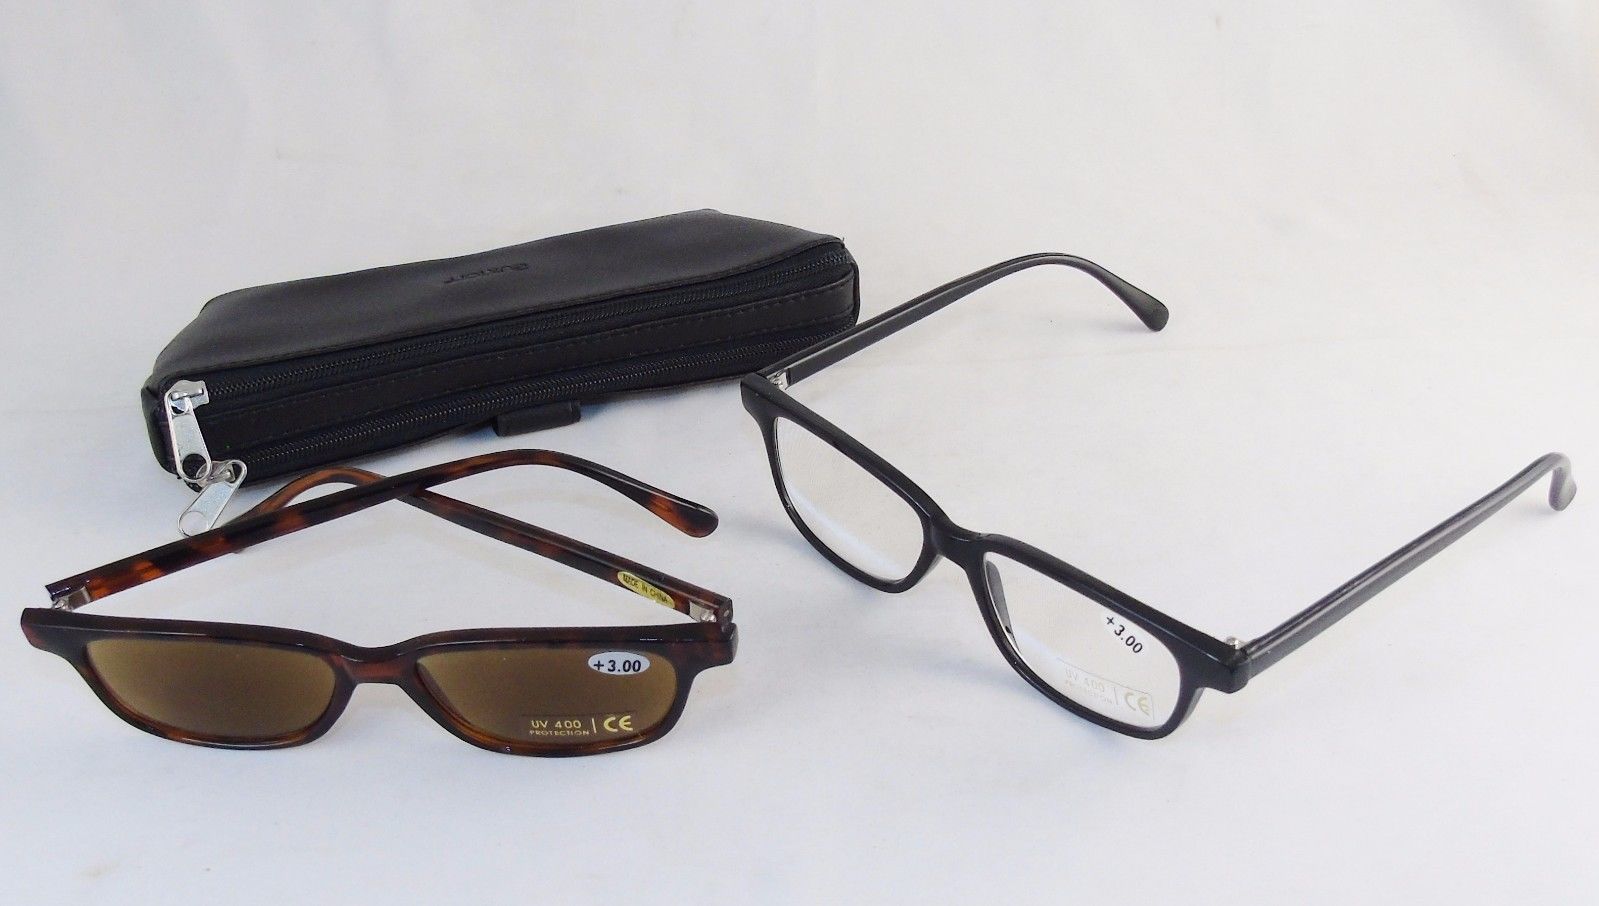 2 Pair Reading Glasses w/Leather Case & Cleaning Cloths ~ Strength 1.5 or 3.0 - $12.95